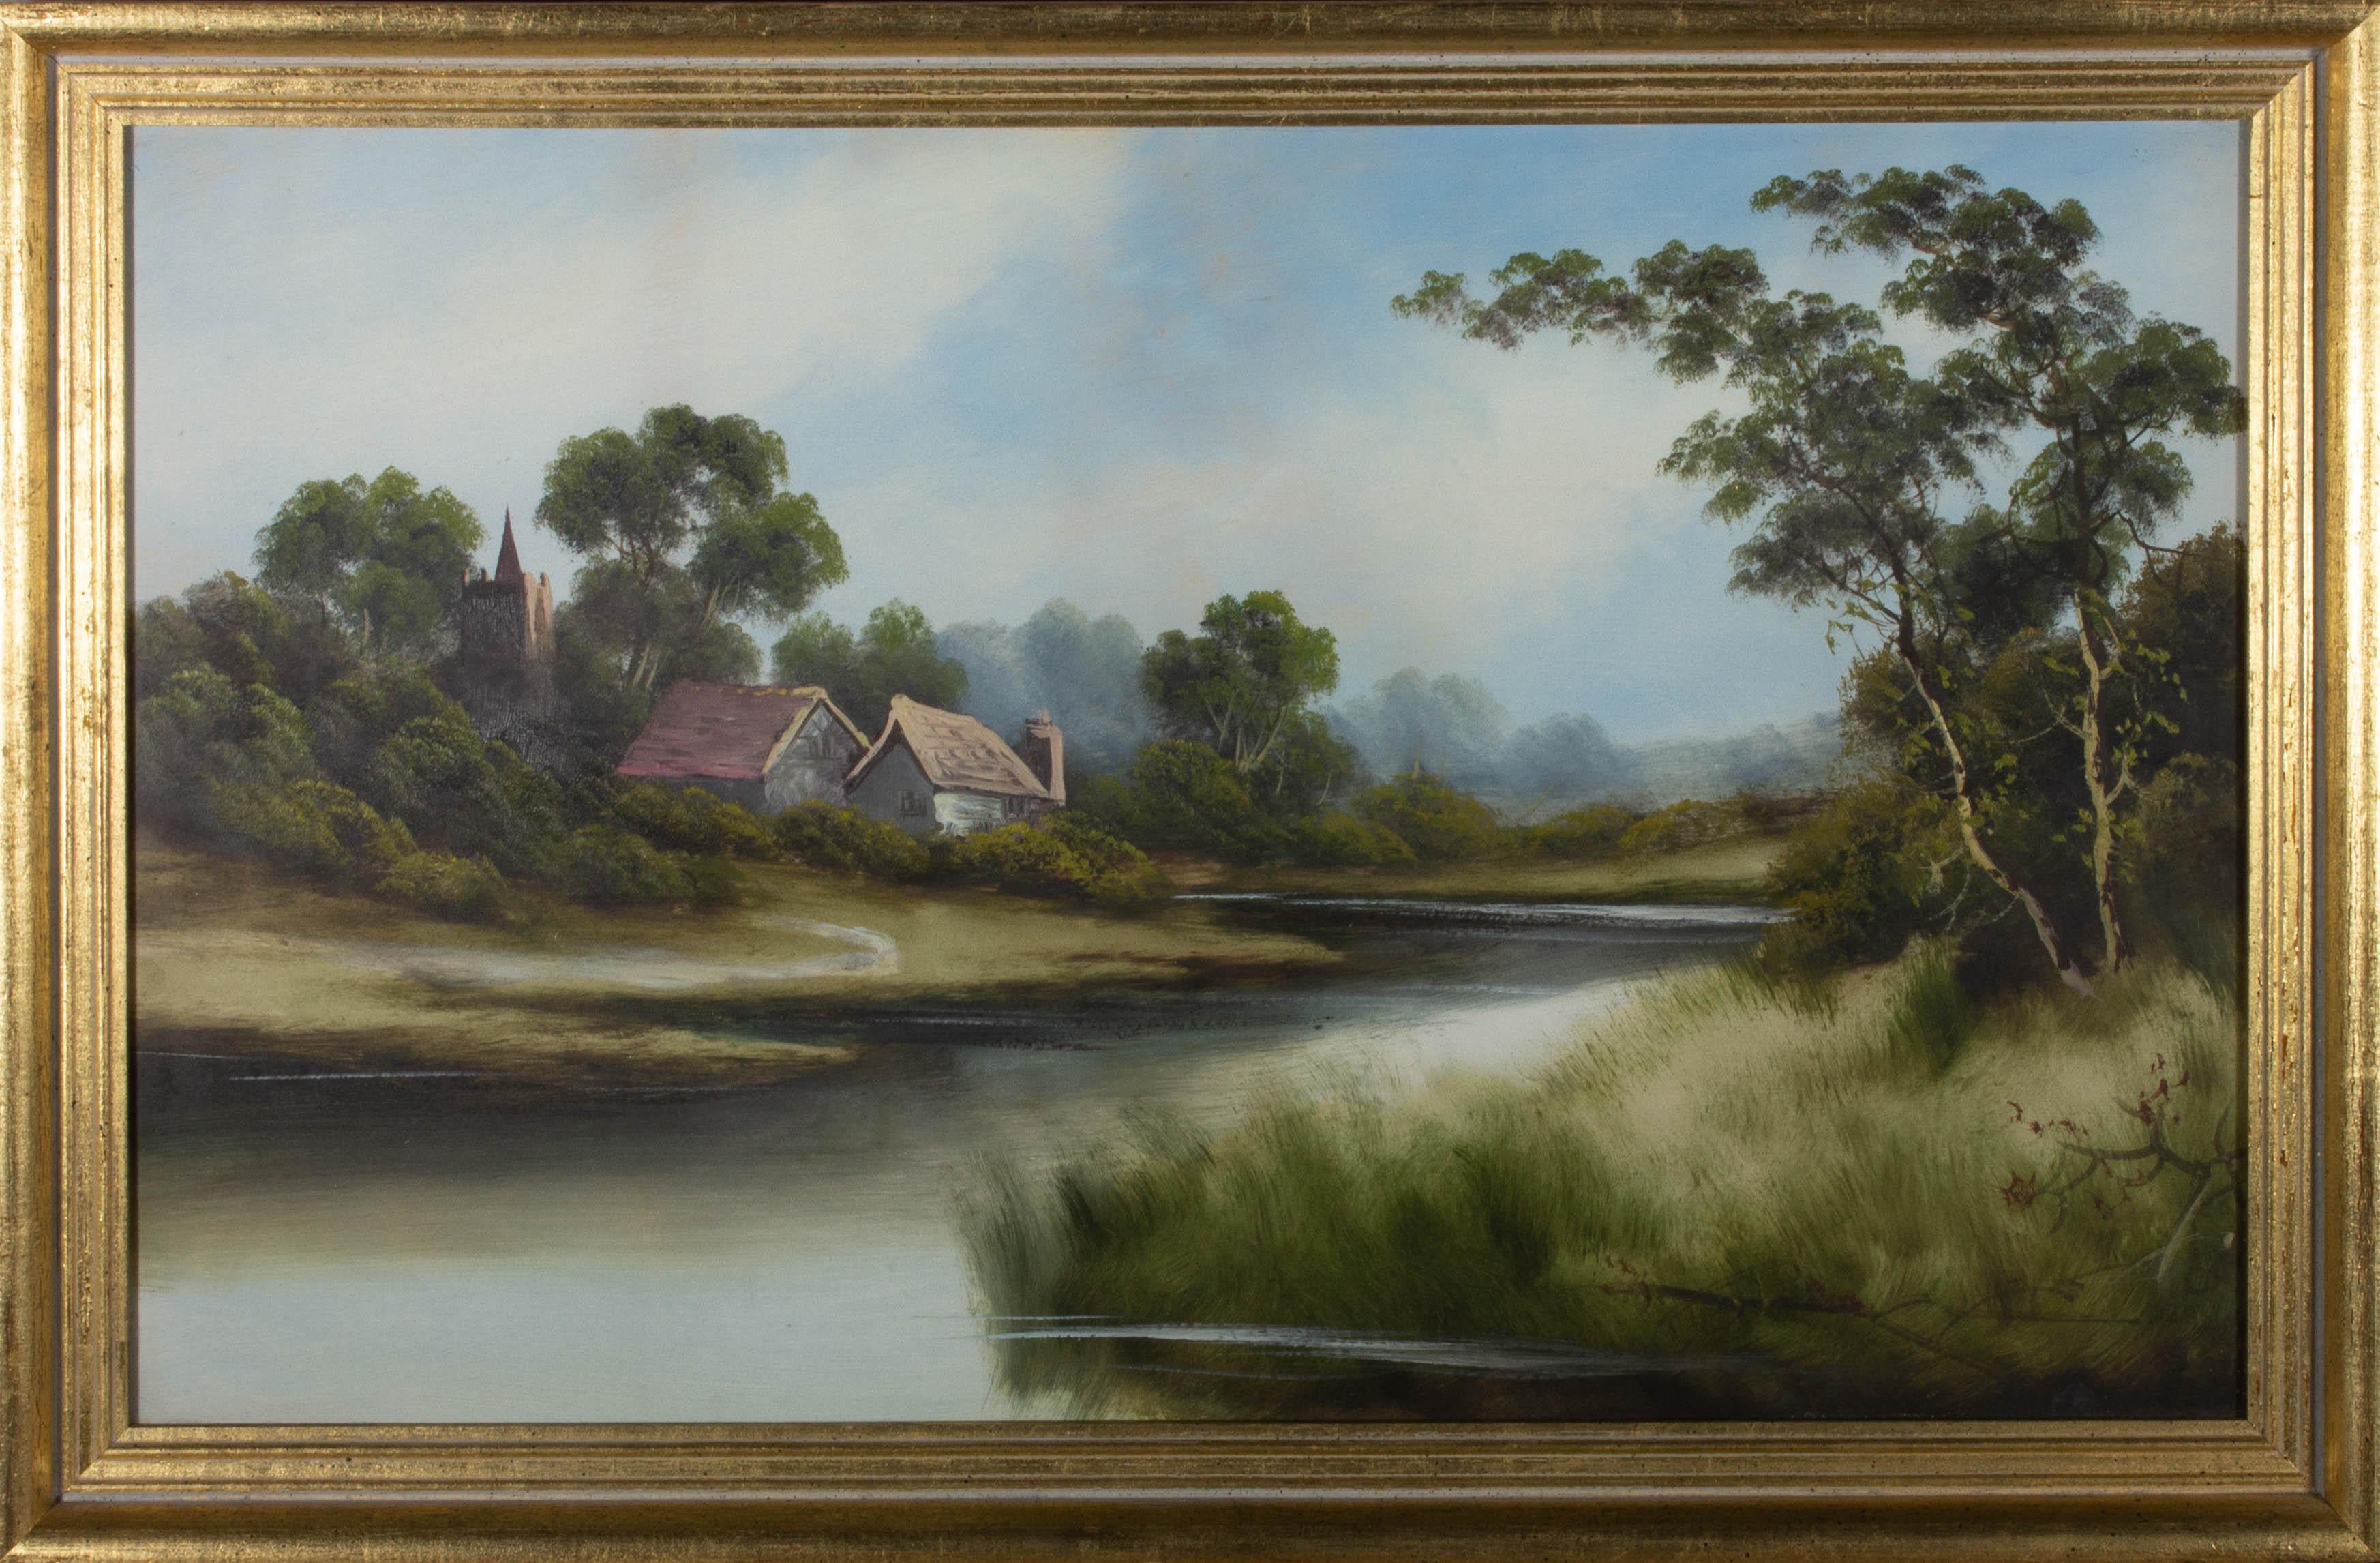 Unknown Landscape Painting - 19th Century Oil - By the River